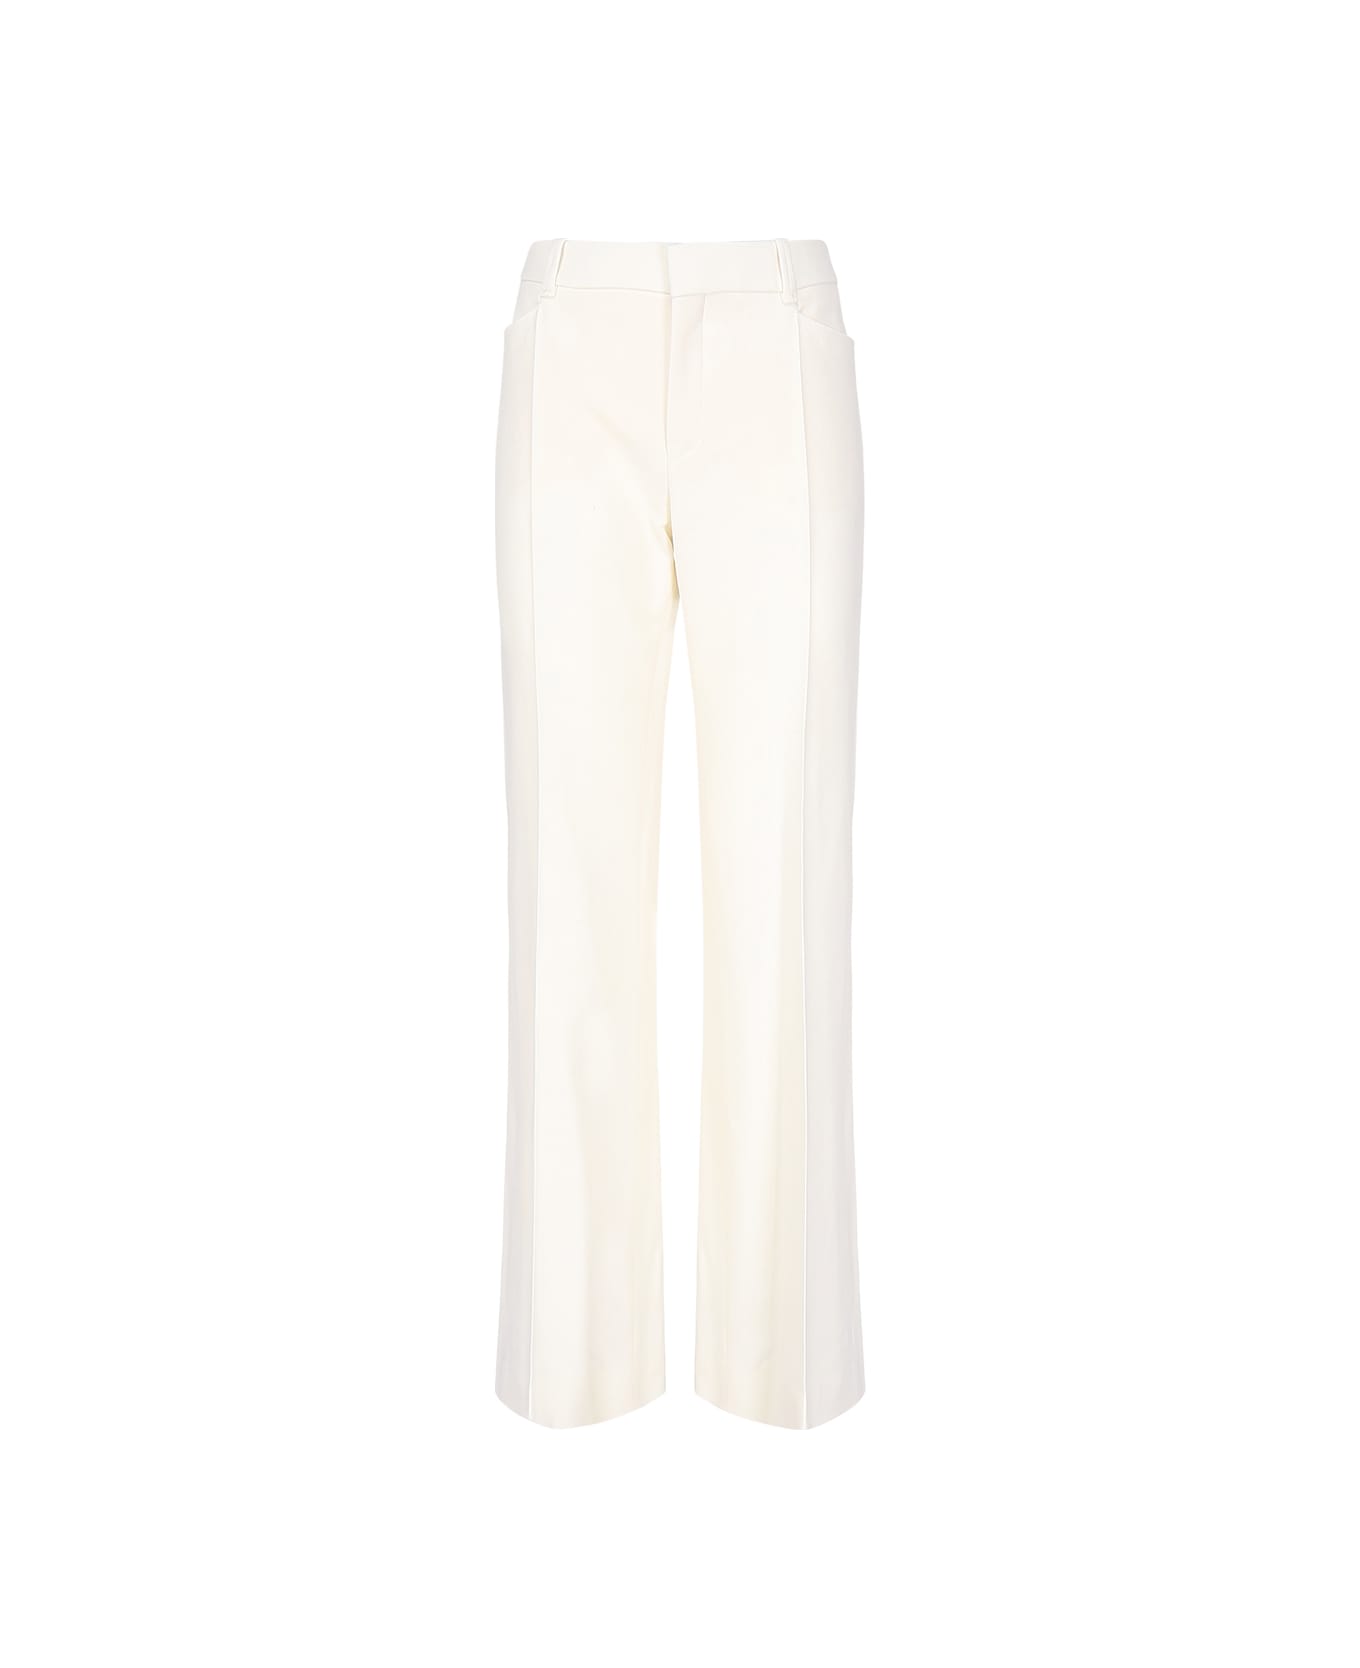 Chloé Flared Hose Trousers - White